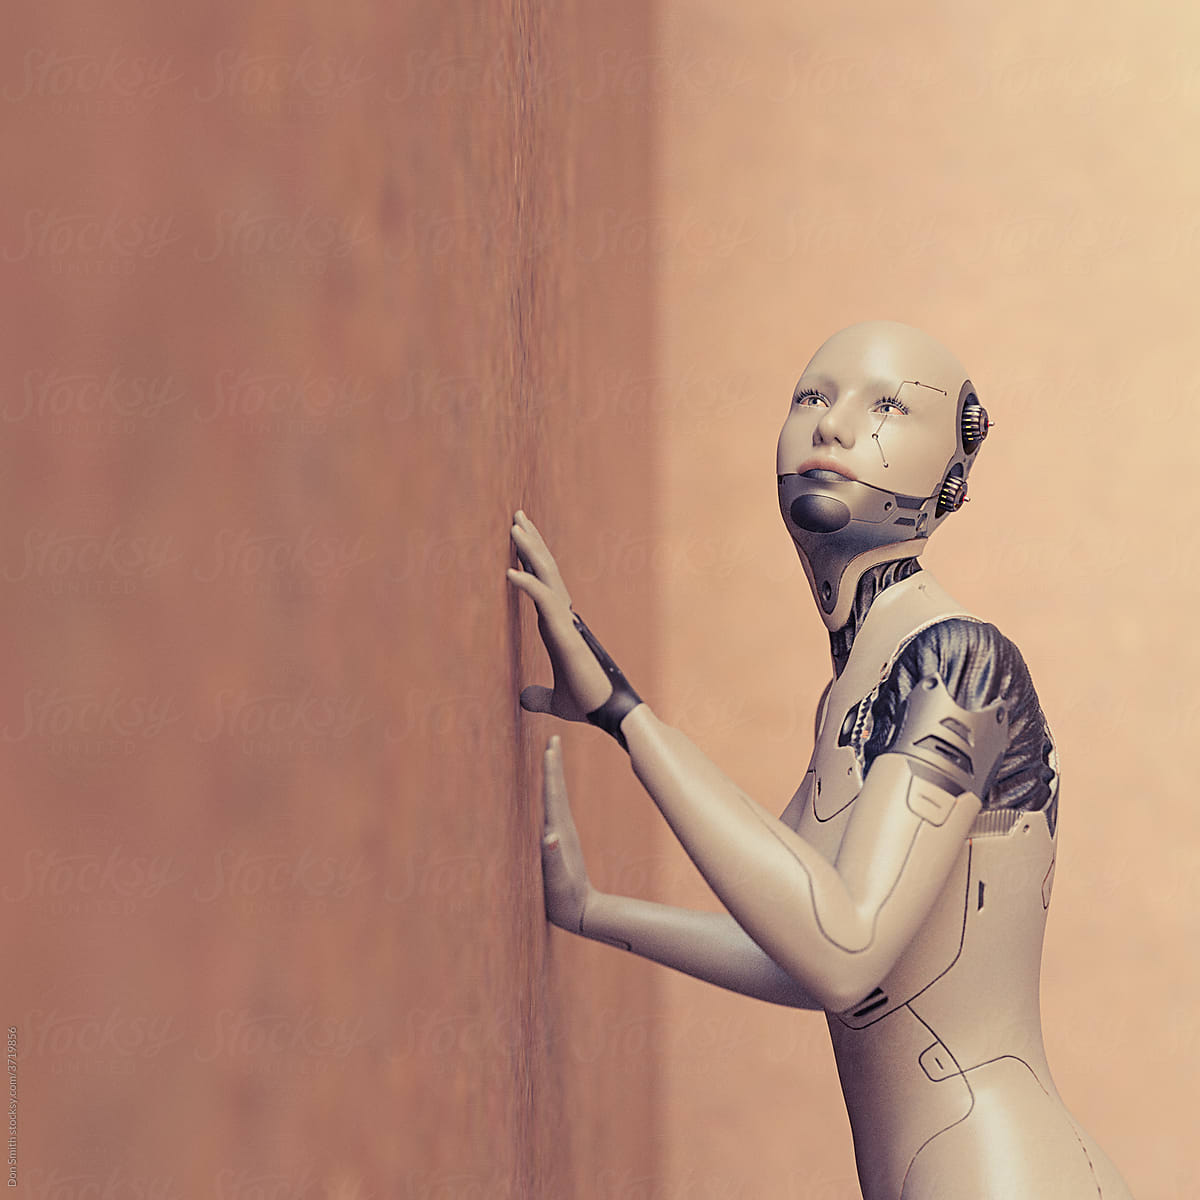 Futuristic female cyborg with hand on wall looking upwards in hope